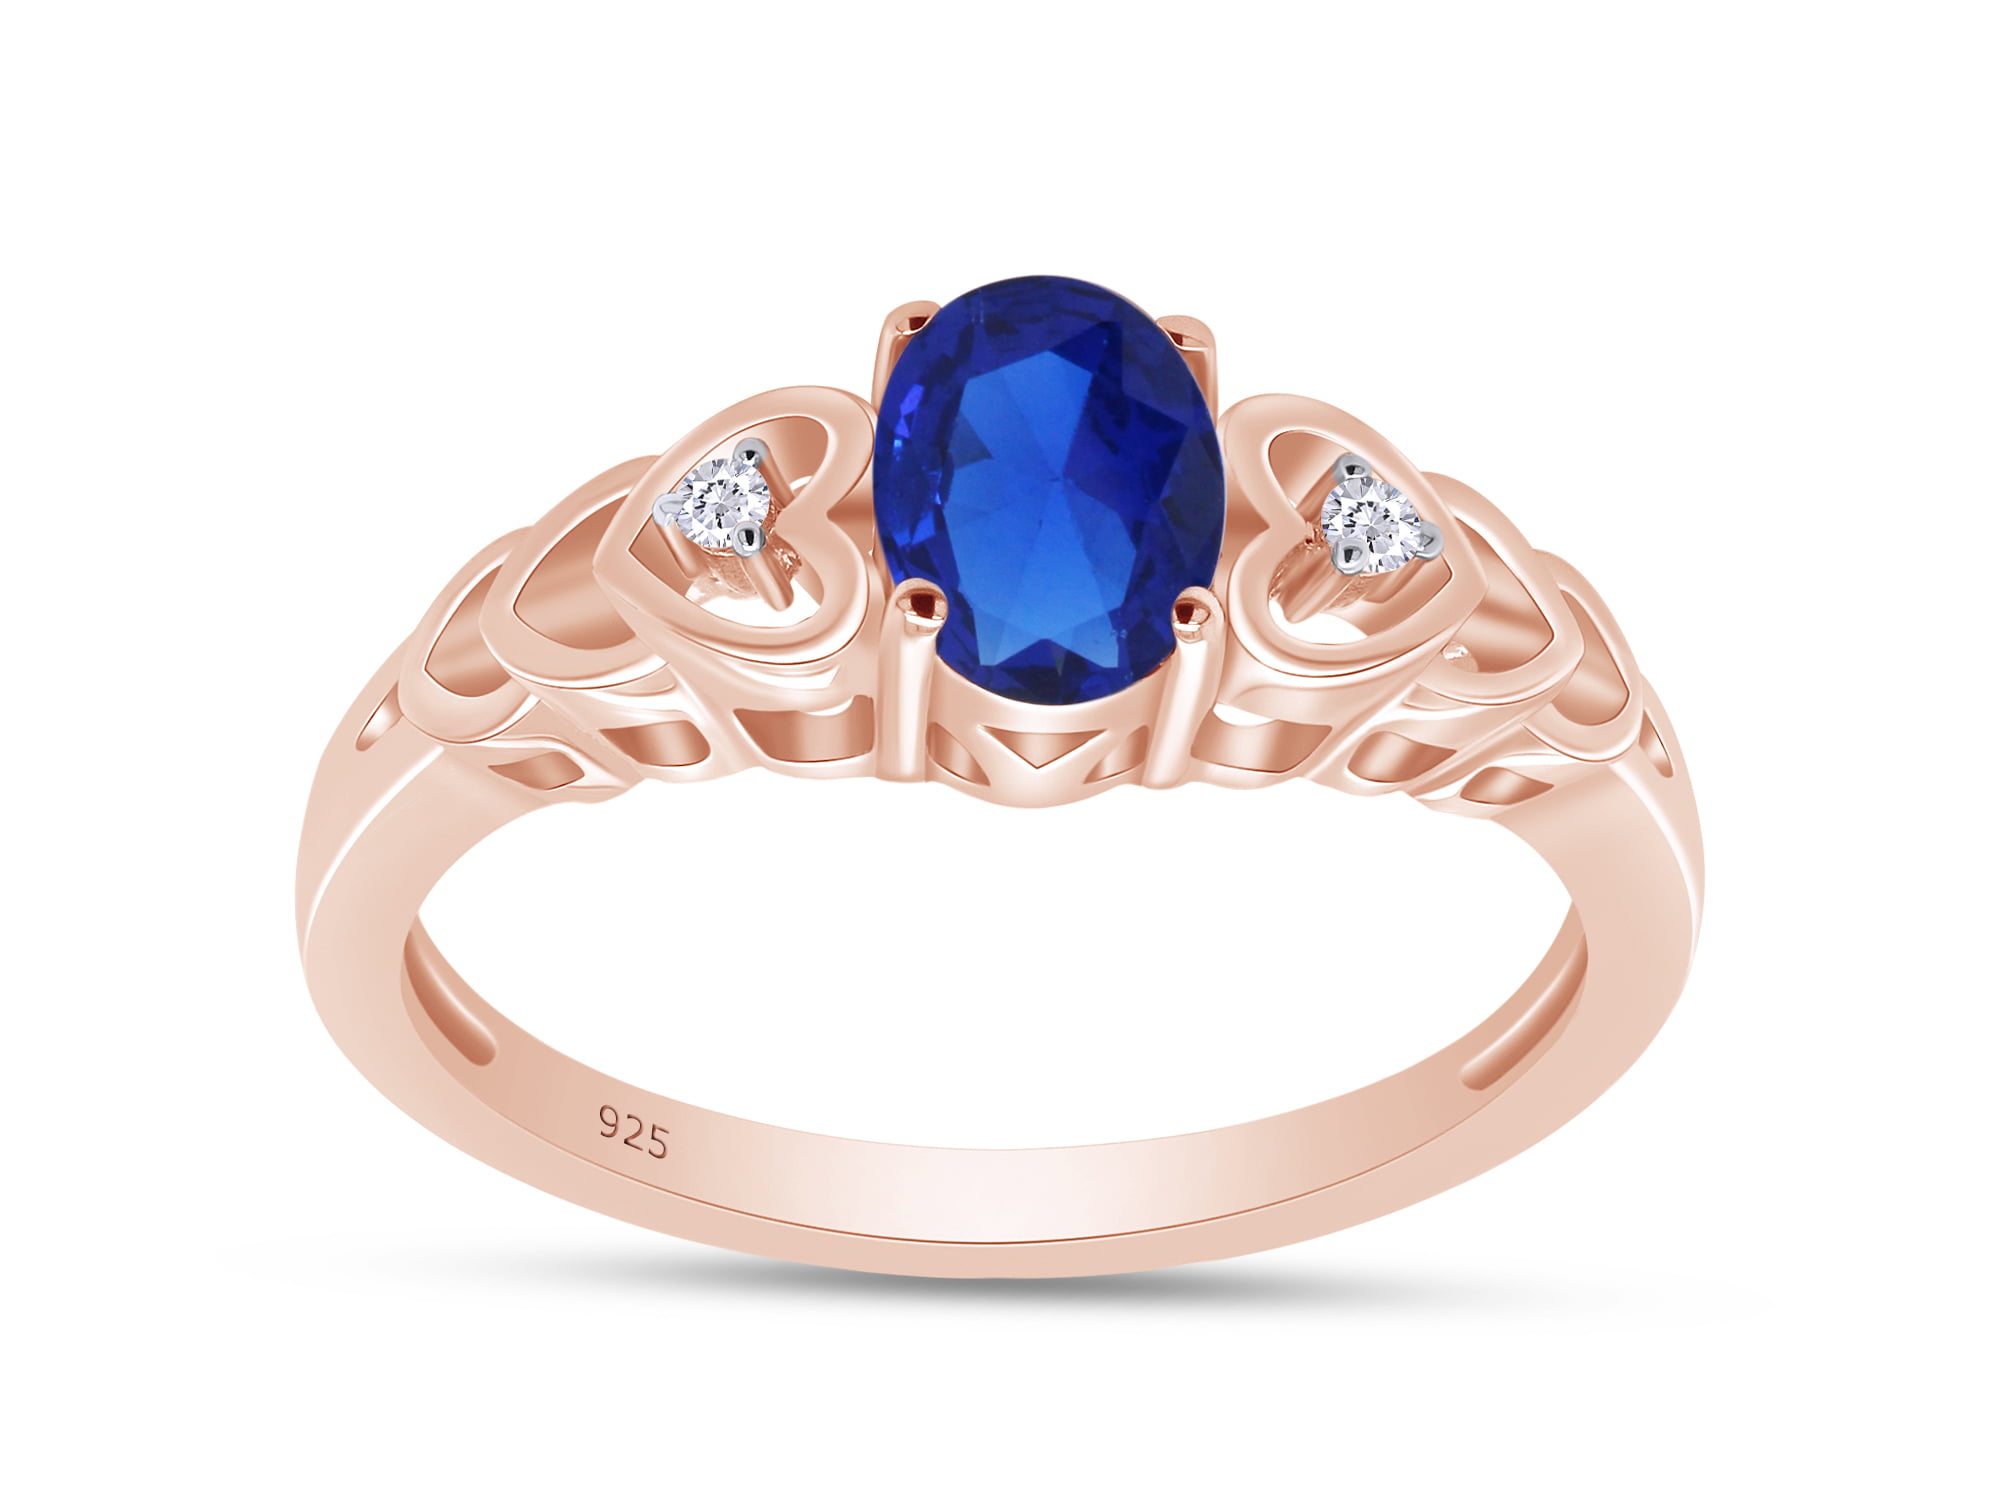 2.00 CT Oval Blue Sapphire Halo Wedding Engagement Ring Anniversary Fashion Ring For Women's Promise Ring 14KT Rose Gold Finish